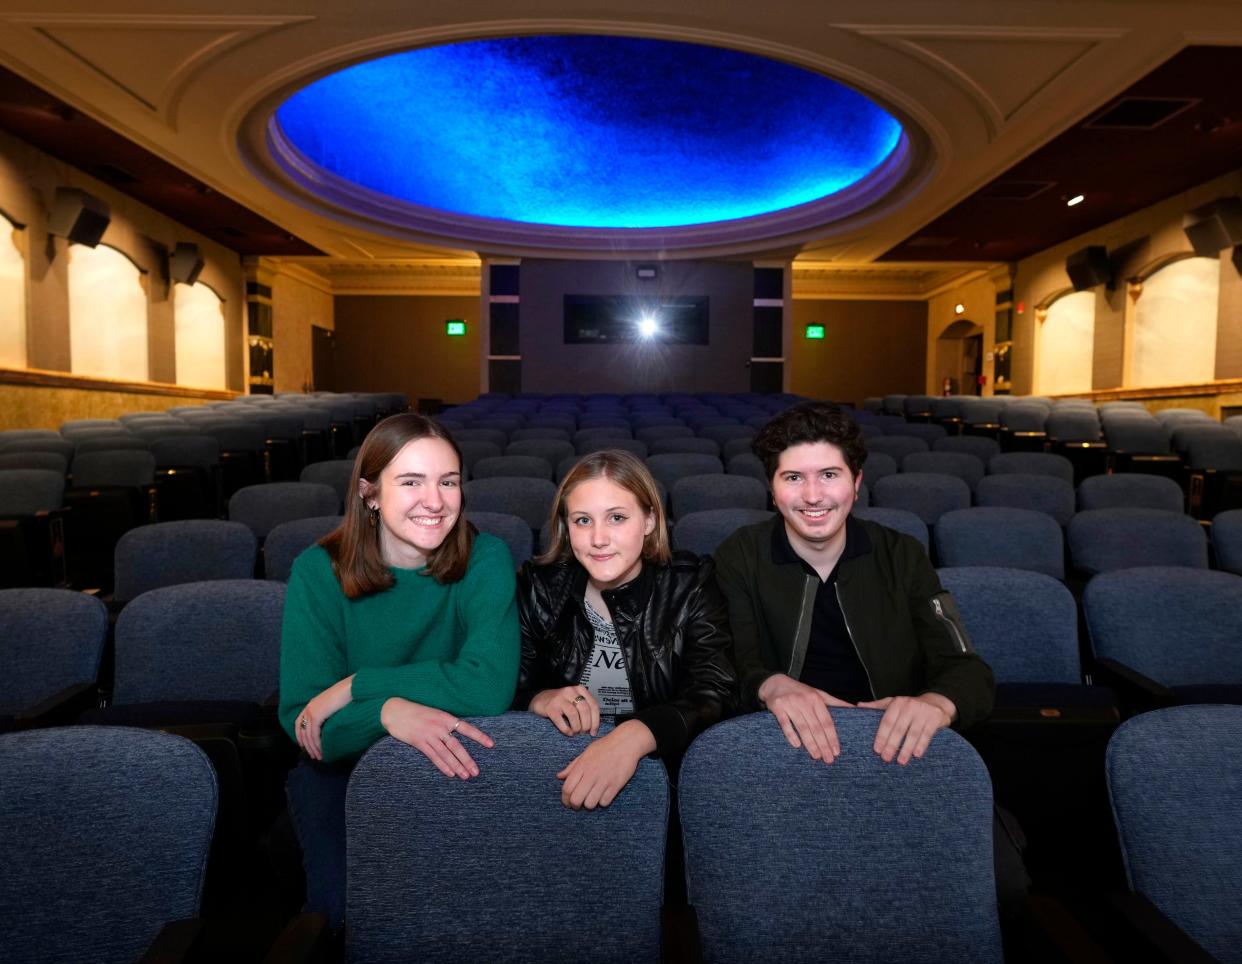 Teen filmmakers, from left, Olivia Cagle, Evelyn Winter, and Alexander Eberhage, will have their film shorts shown during this year's Milwaukee Film Fest at the Oriental Theater in Milwaukee on Sunday, May 1, 2022.